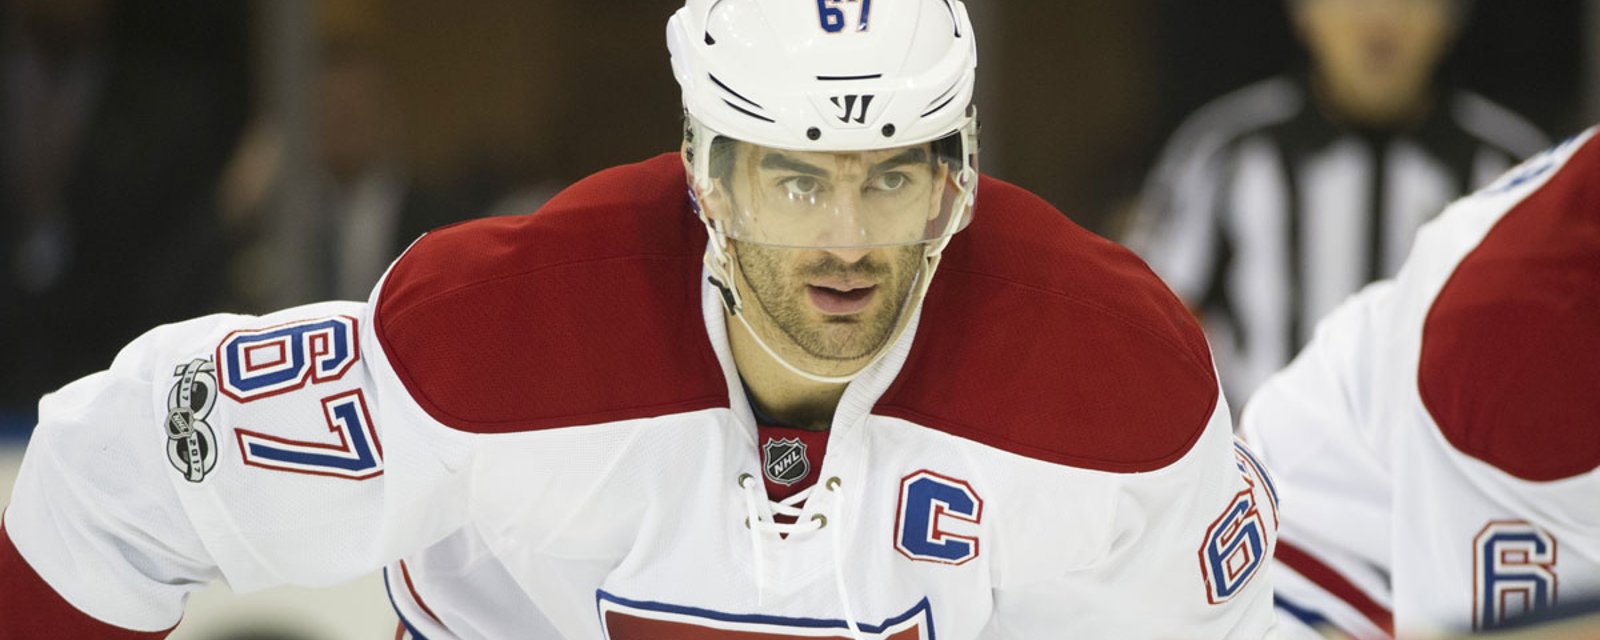 Breaking: Latest trade destinations for Pacioretty revealed! 